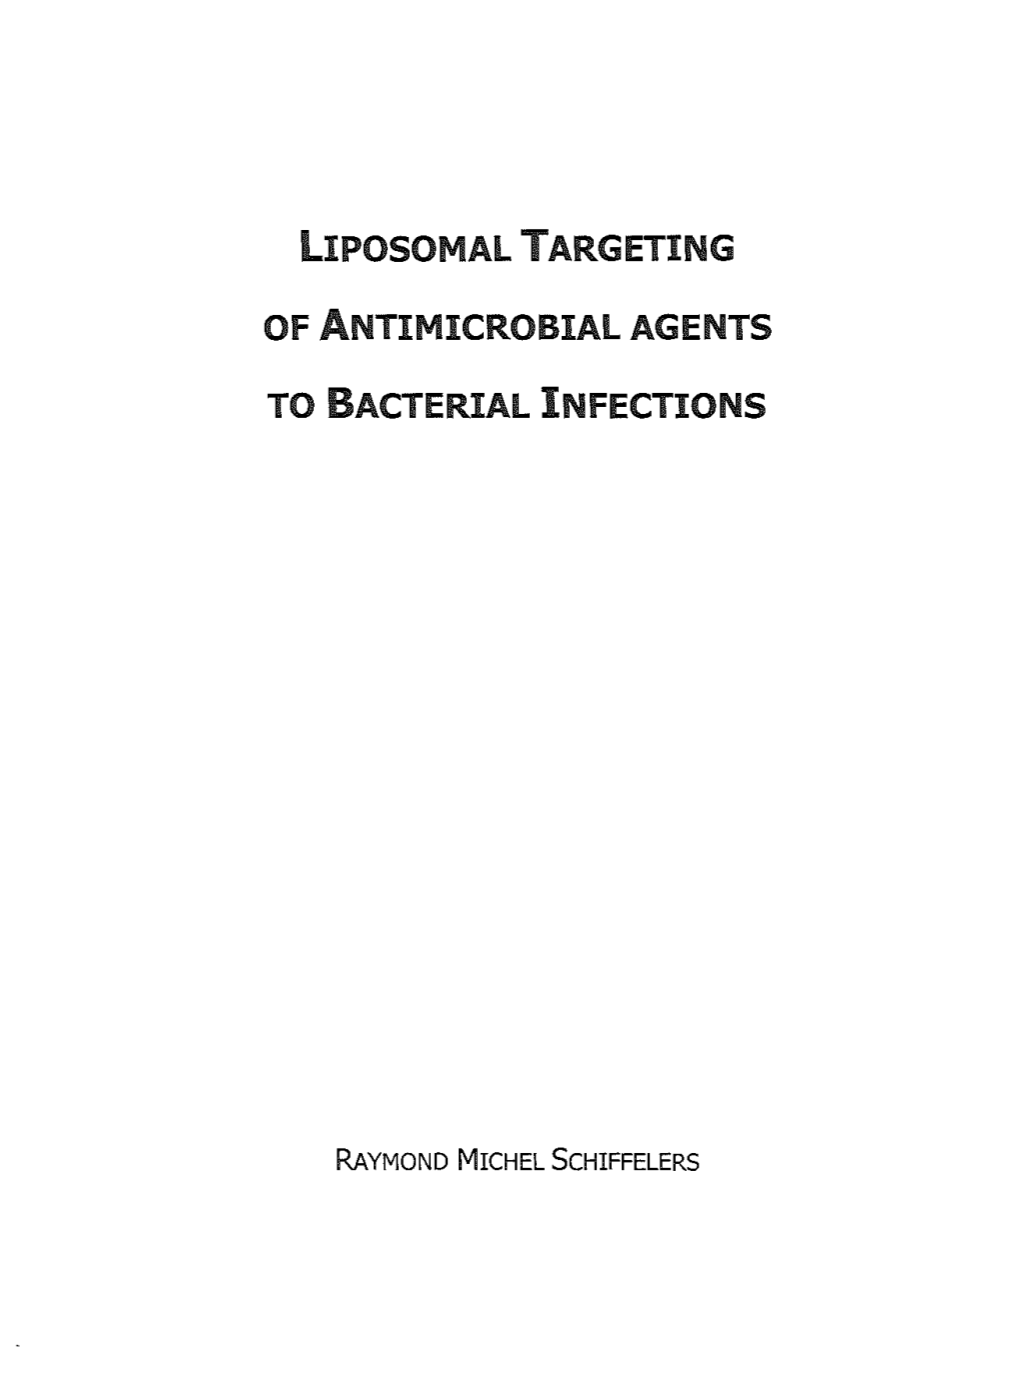 Liposomal Targeting of Antimicrobial Agents to Bacterial Infections by Raymond Michel Schiffelers